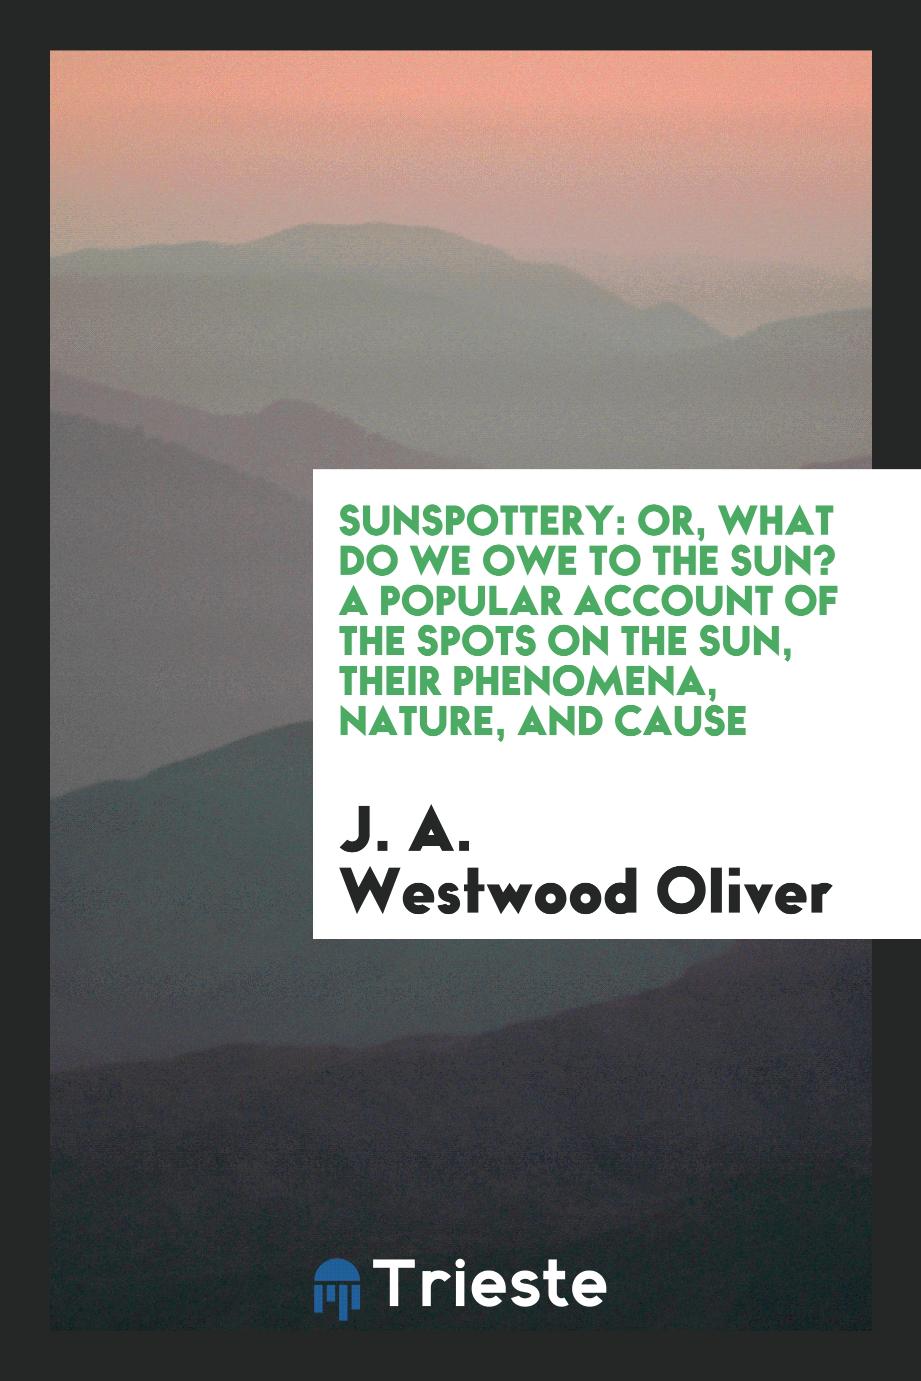 Sunspottery: or, What do we owe to the sun? A popular account of the spots on the Sun, their Phenomena, Nature, and Cause